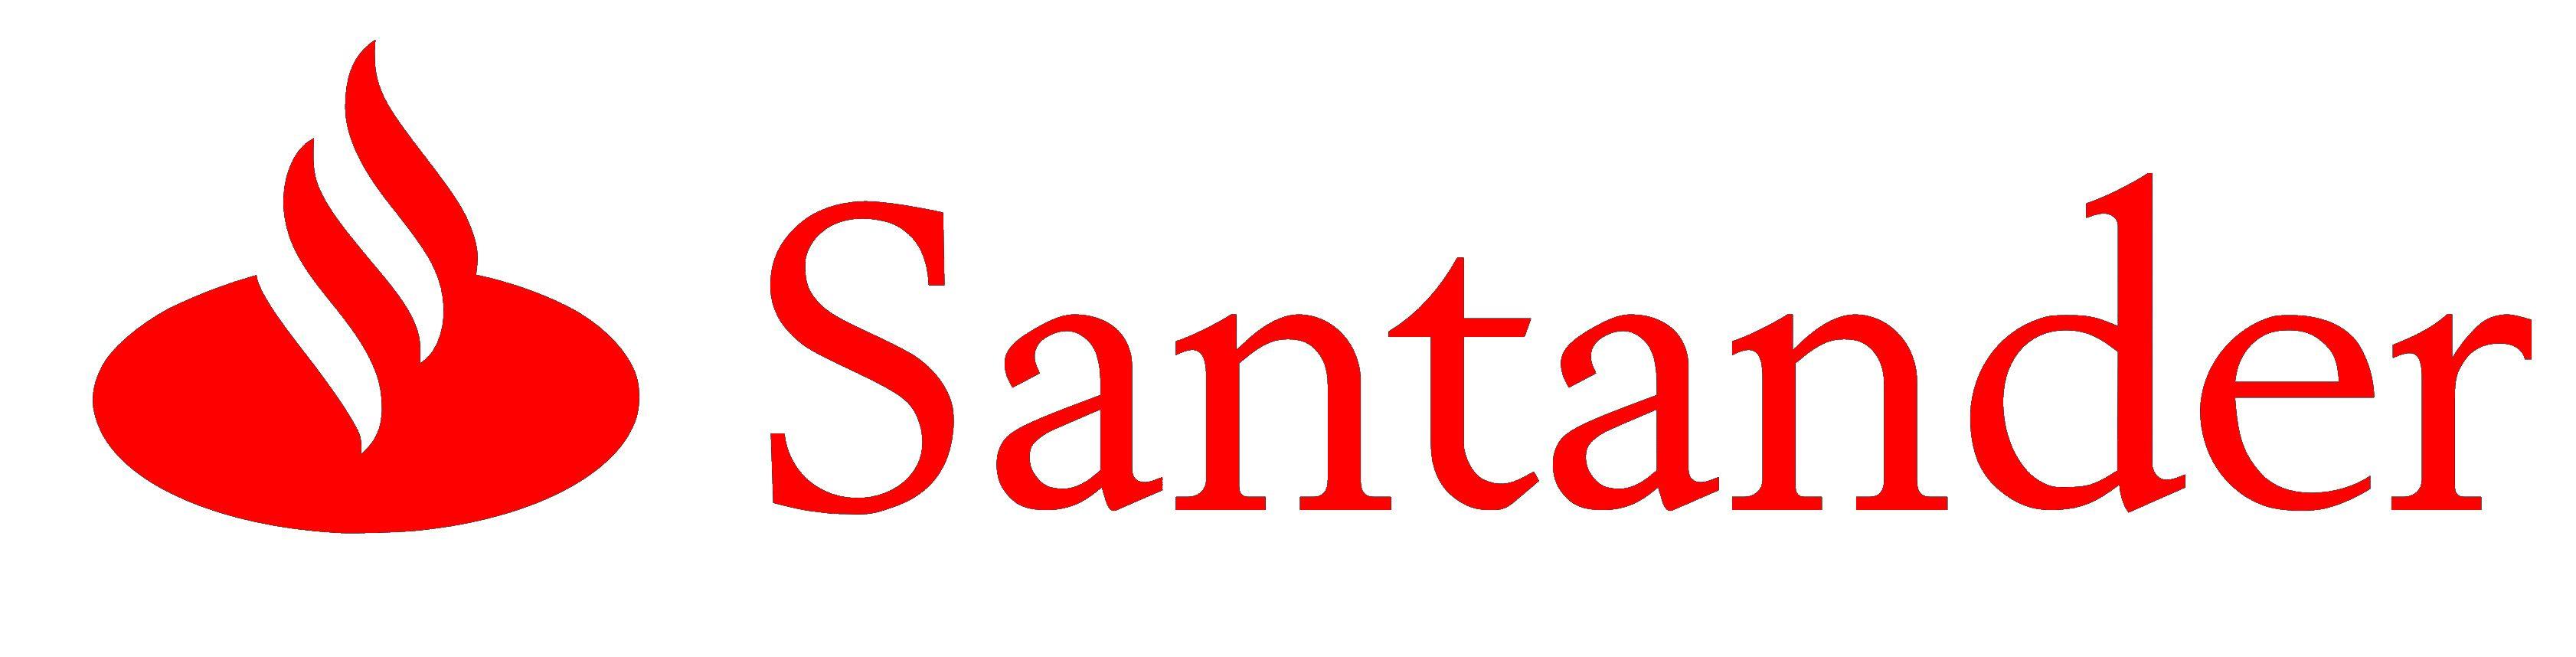 White Santander Logo - Santander Logo, Santander Symbol, Meaning, History and Evolution